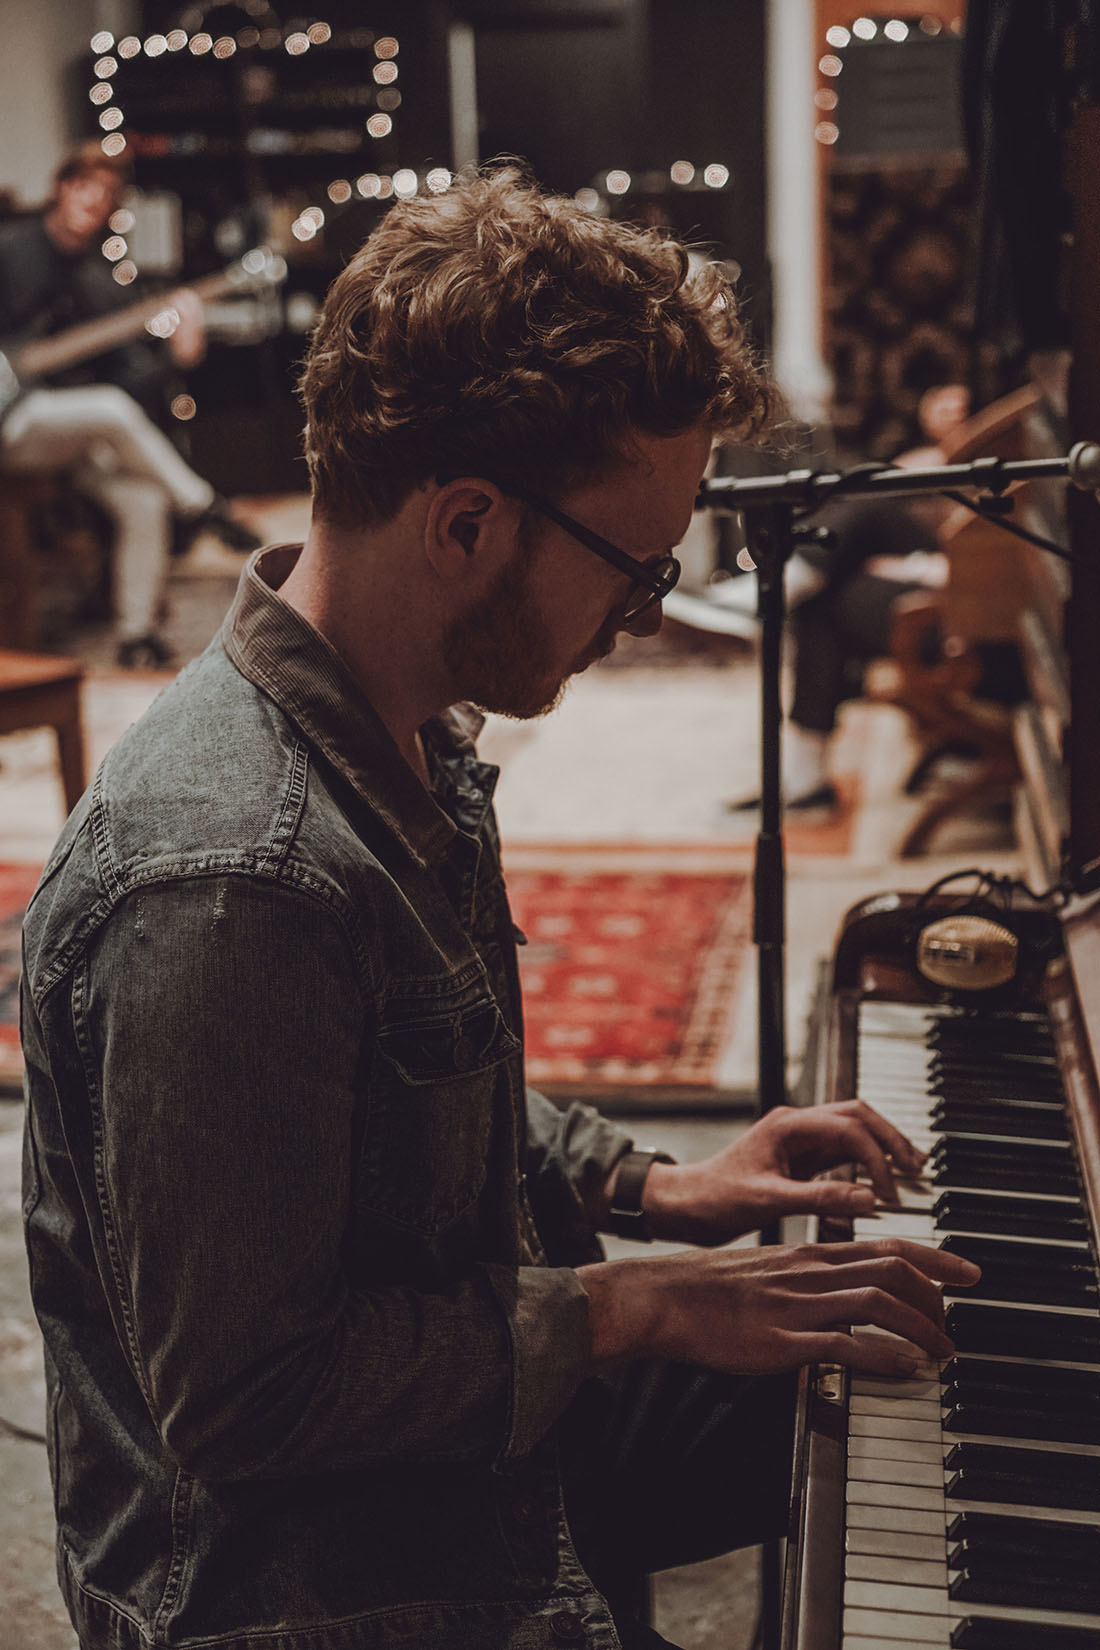 Alexander Esp playing piano in a denim jacket at Bookhouse Studios